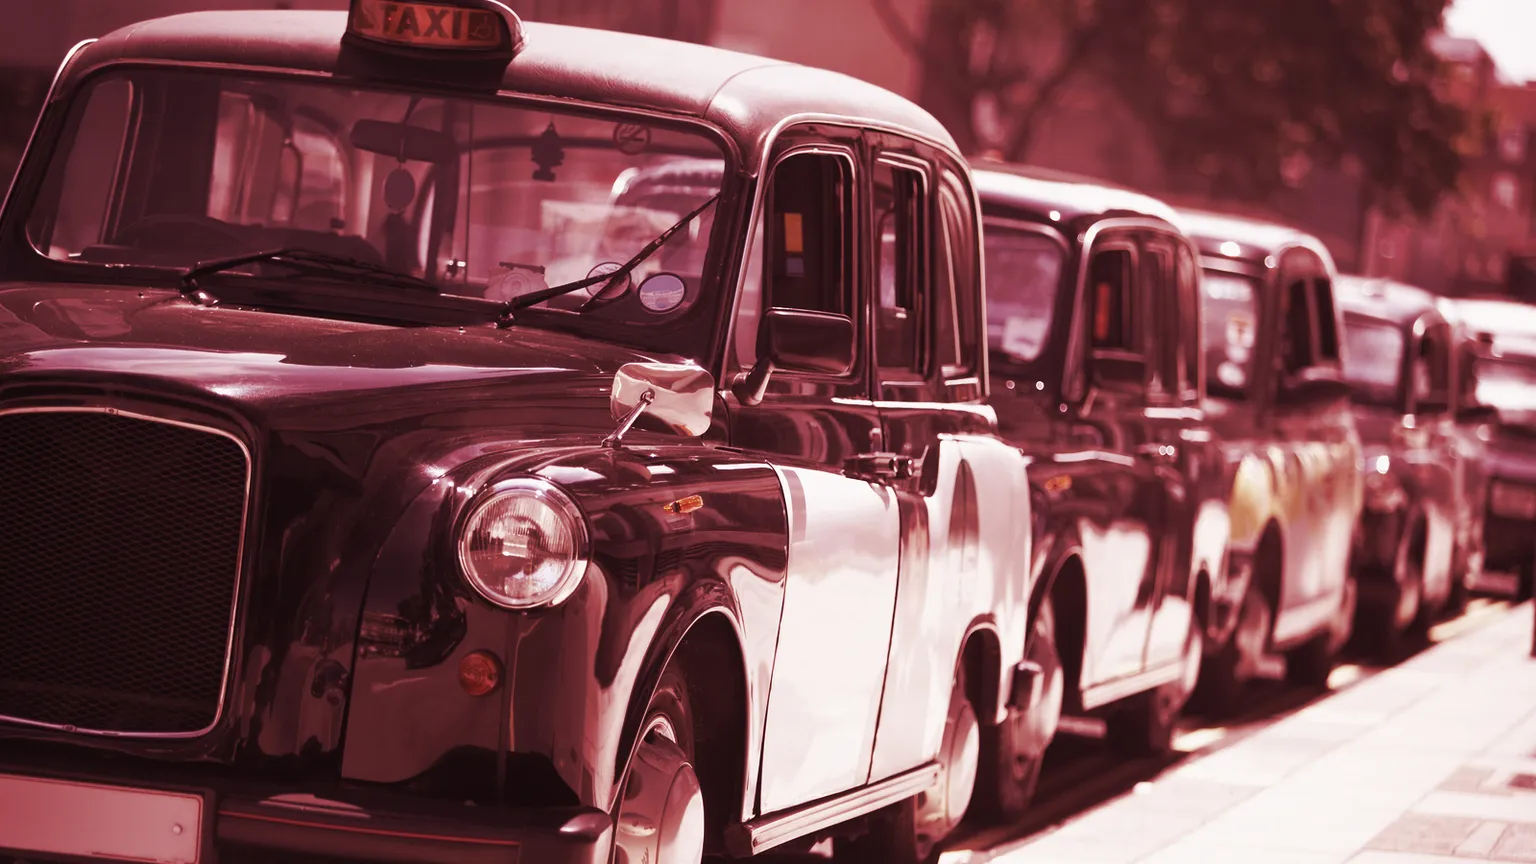 Crypto payments for taxis are being introduced in the UK and Scandinavia. Image: Shutterstock